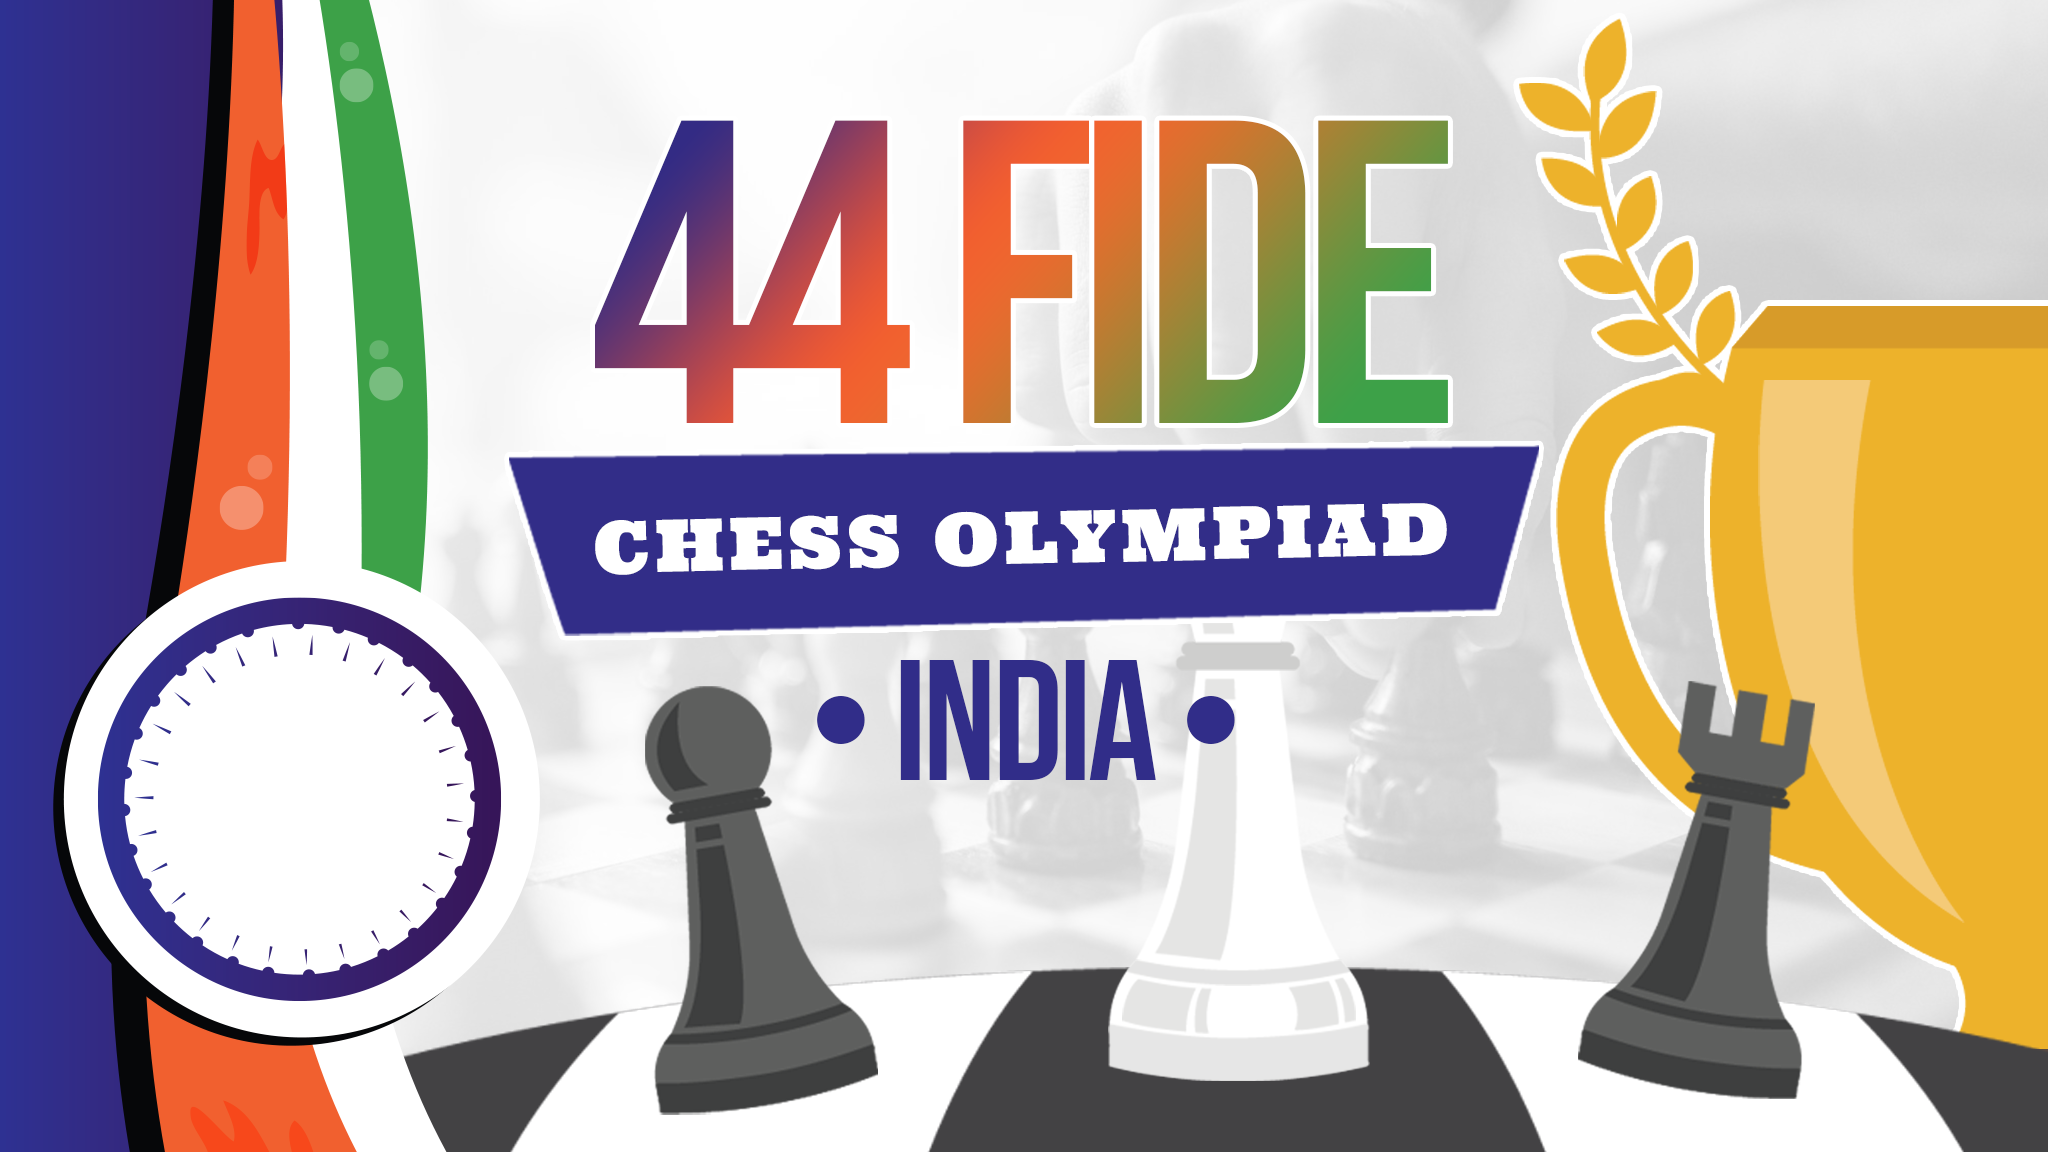 India 2022 4th FIDE Chess Olympiad Sports Games Horse Mascot Stamp Blk/4